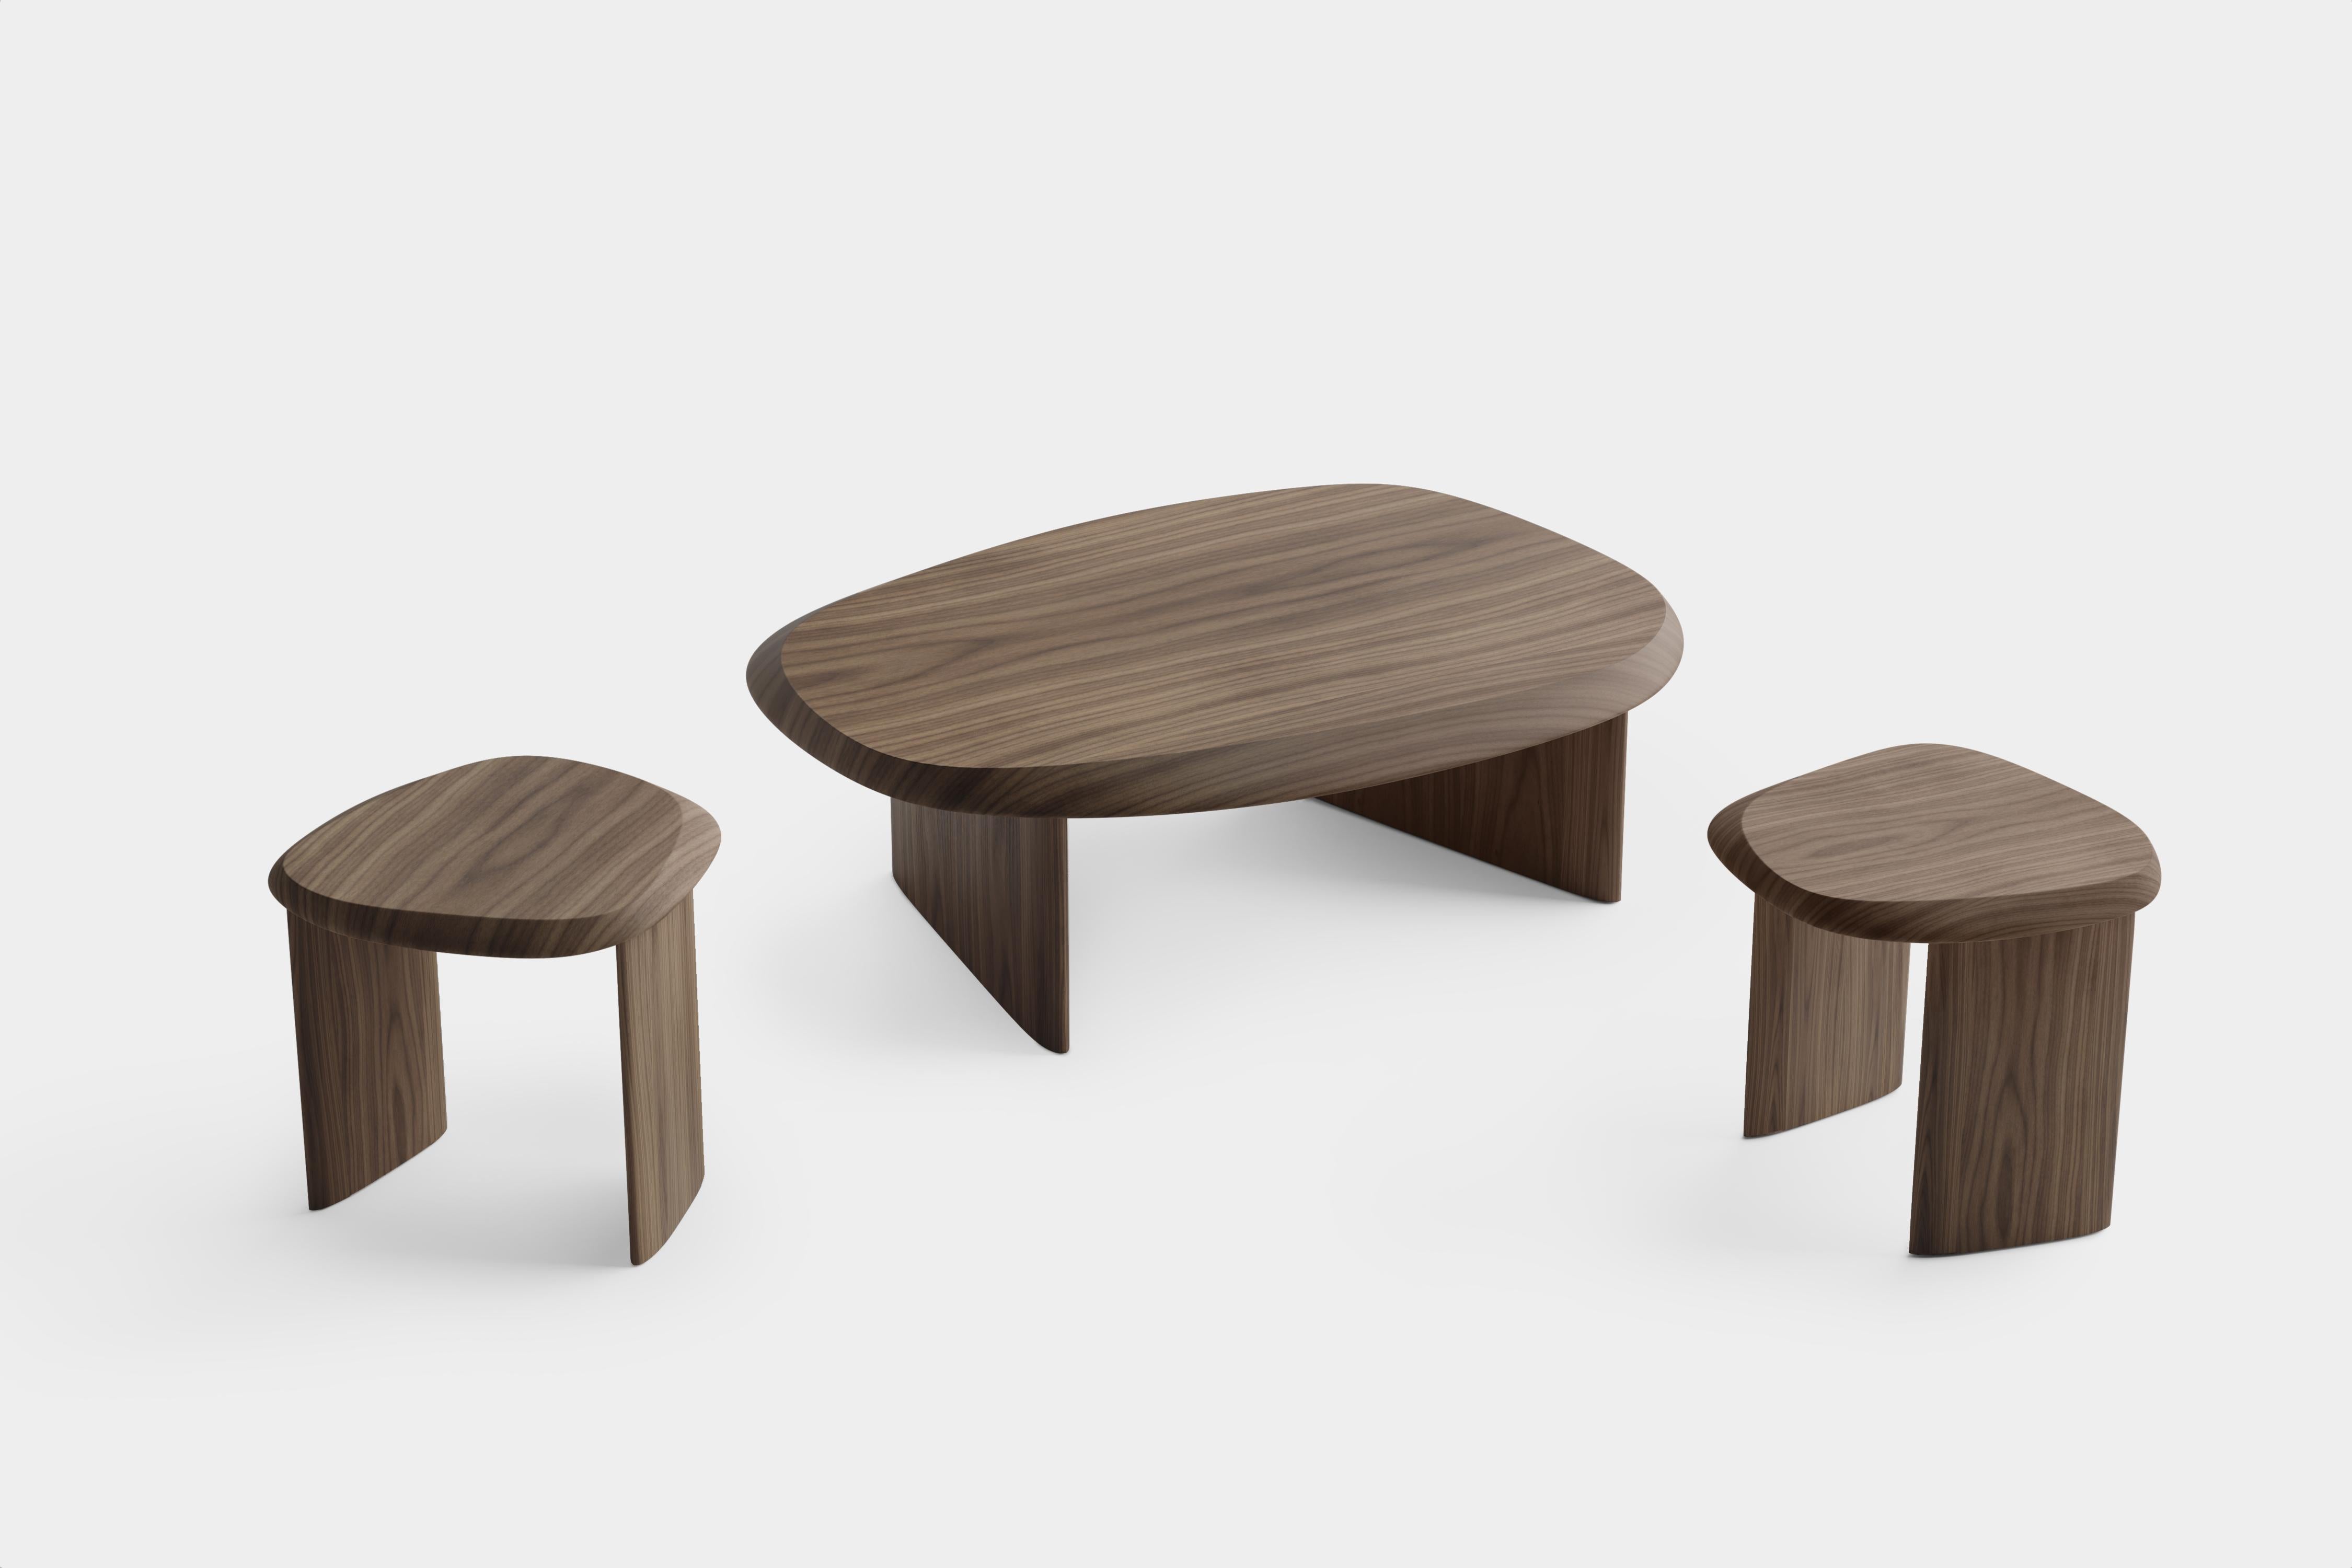 Set of two side tables and a large coffee table from the Duna Collection. Delicately crafted to resemble a serene landscape through its carefully polished table top surface and its fluid smooth poplar wood base. Combination of finishes